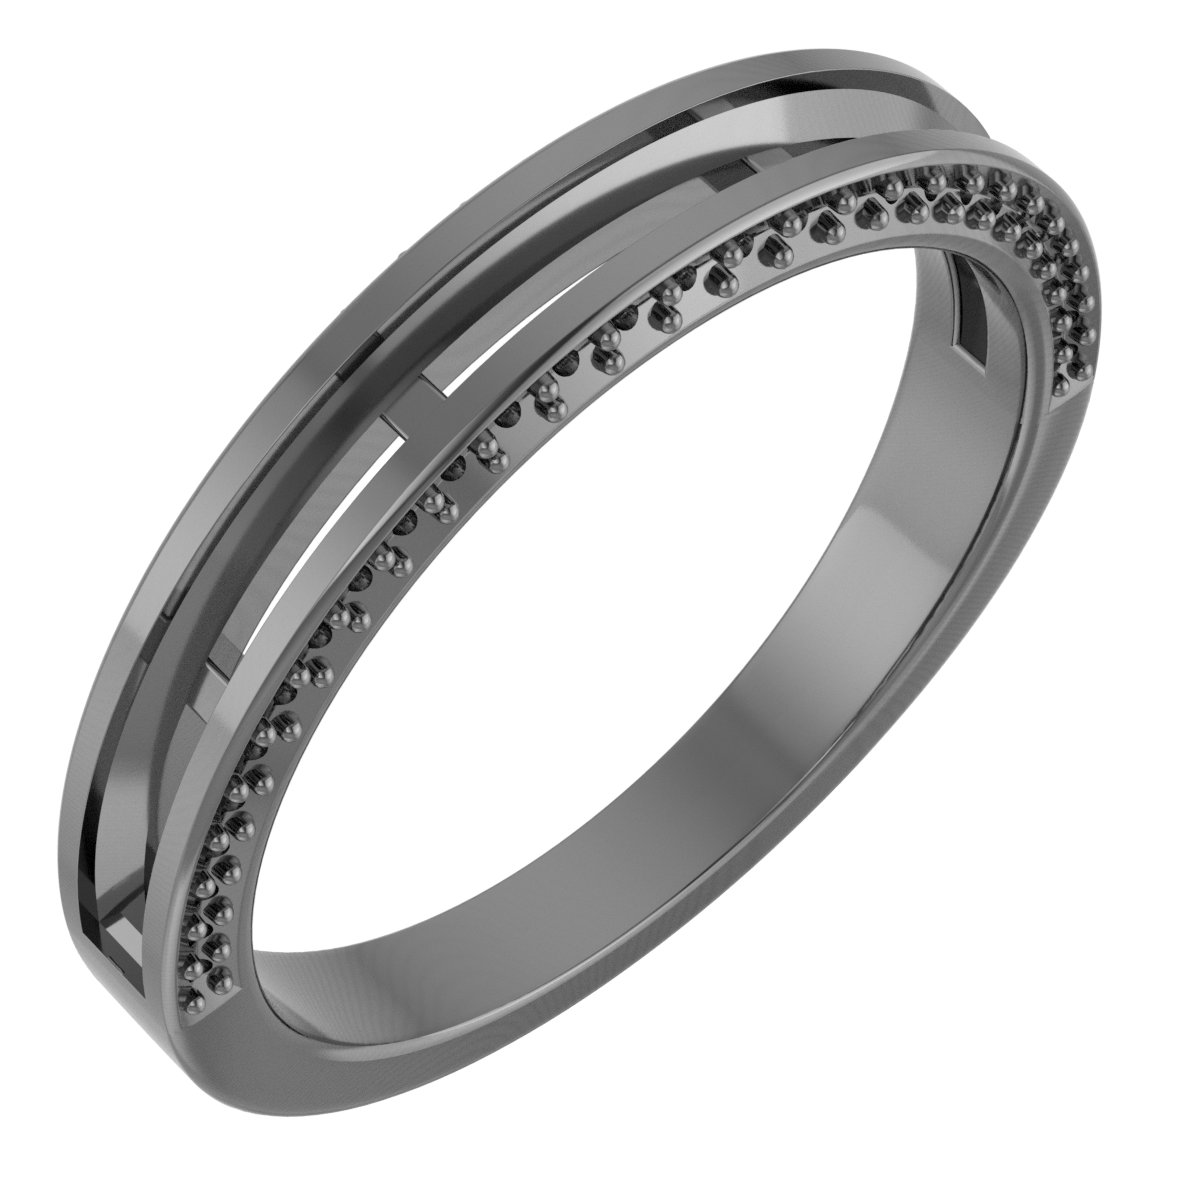 123940 / Neosadený / Sterling Silver / Square / 1.75X1.75 Mm / Polished / Anniversary Band Mounting